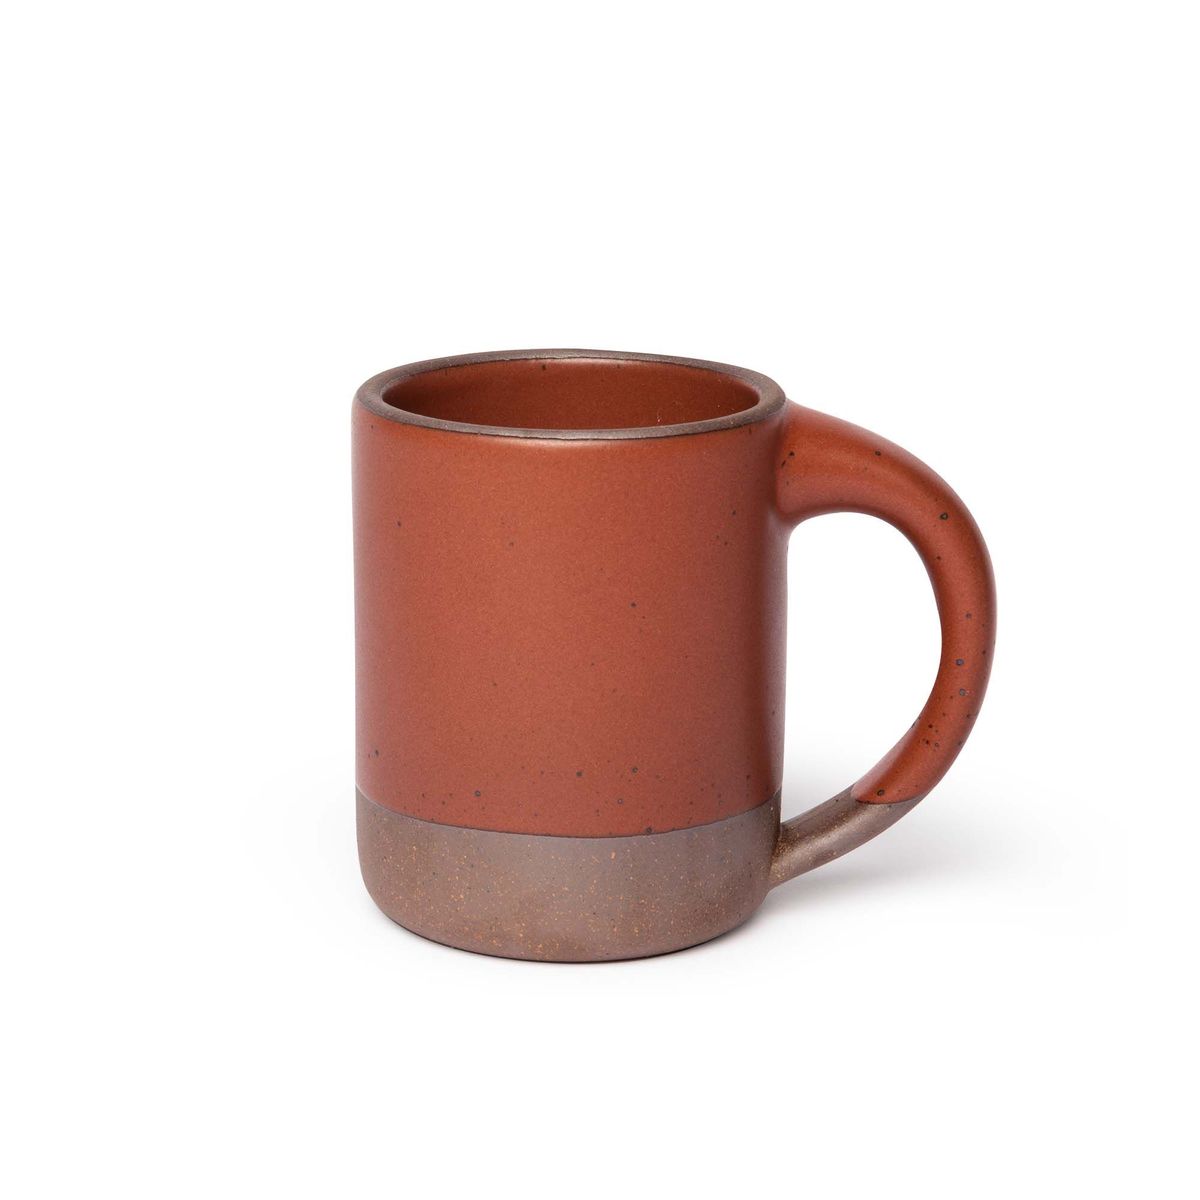 A big sized ceramic mug with handle in a cool burnt terracotta glaze featuring iron speckles and unglazed rim and bottom base.